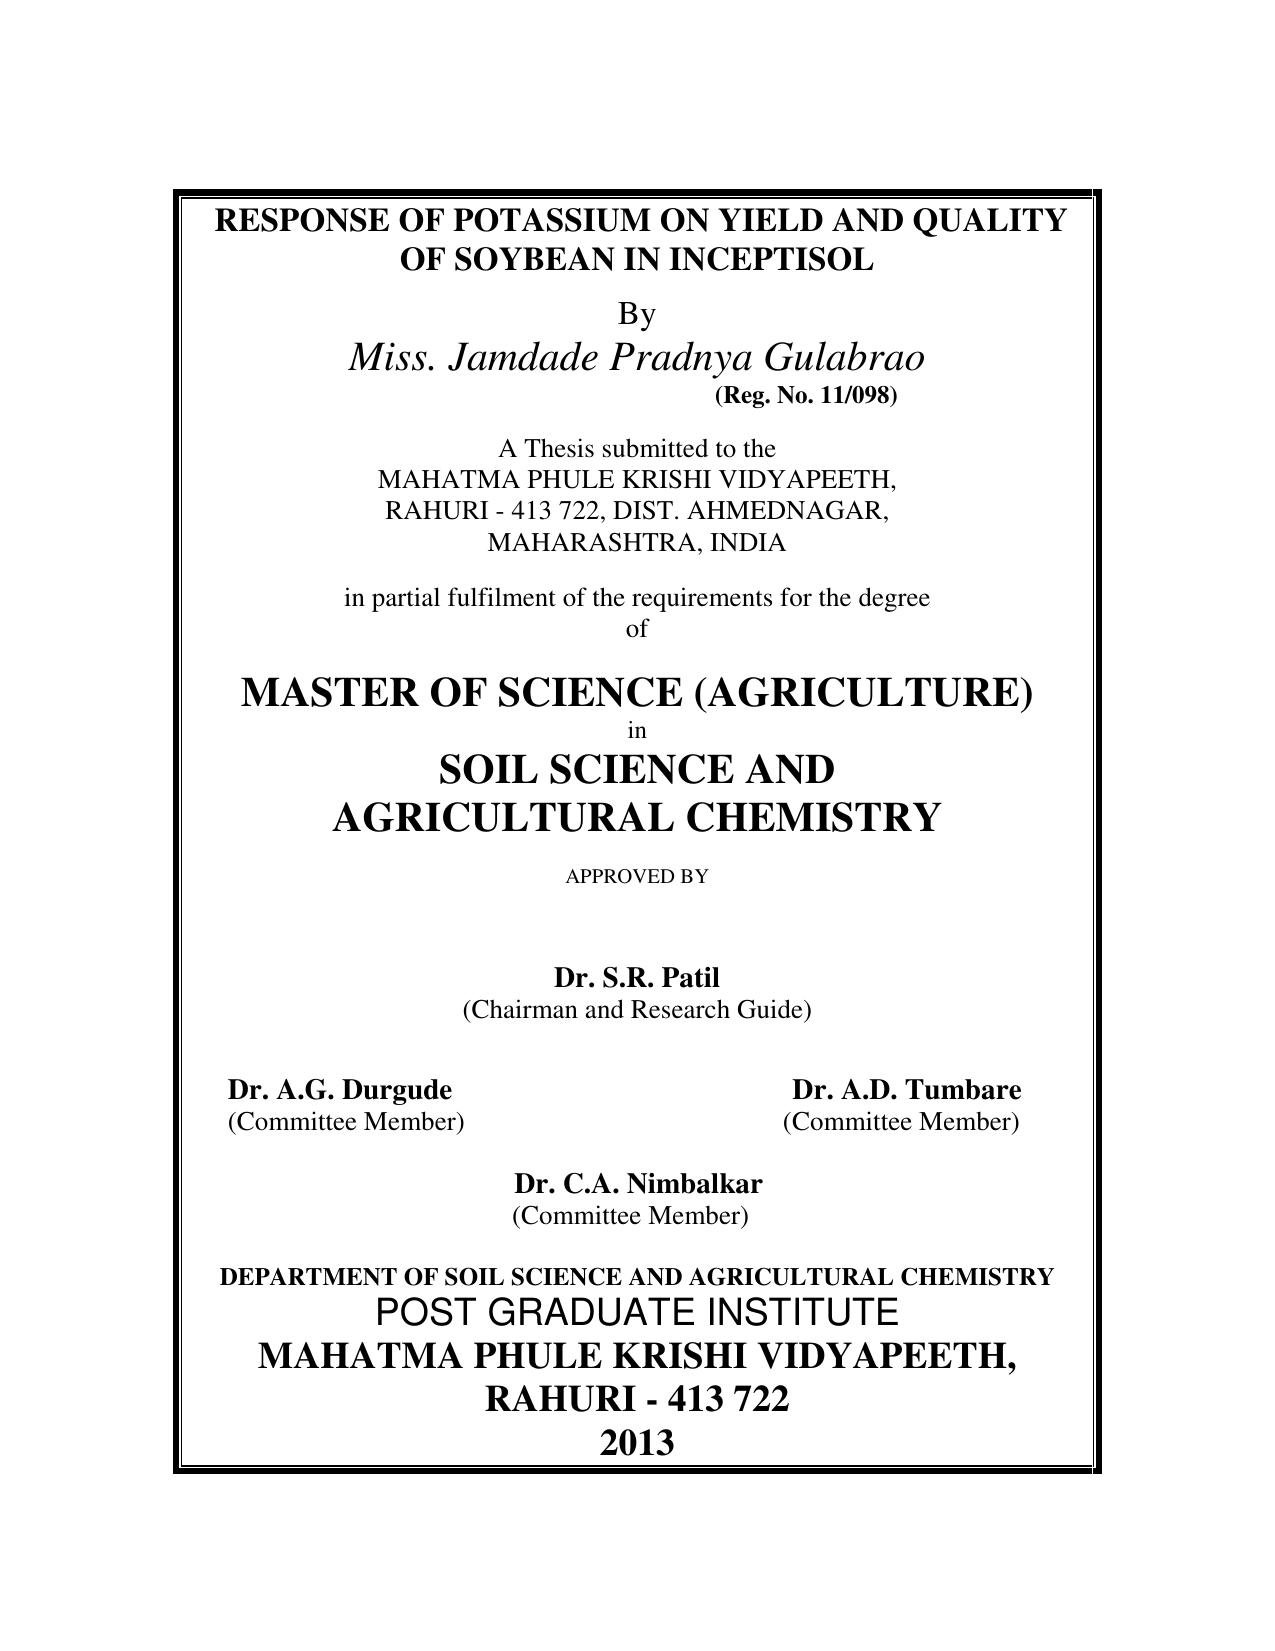 (AGRICULTURE) SOIL SCIENCE AND AGRICULTURAL CHEMISTRY 2017